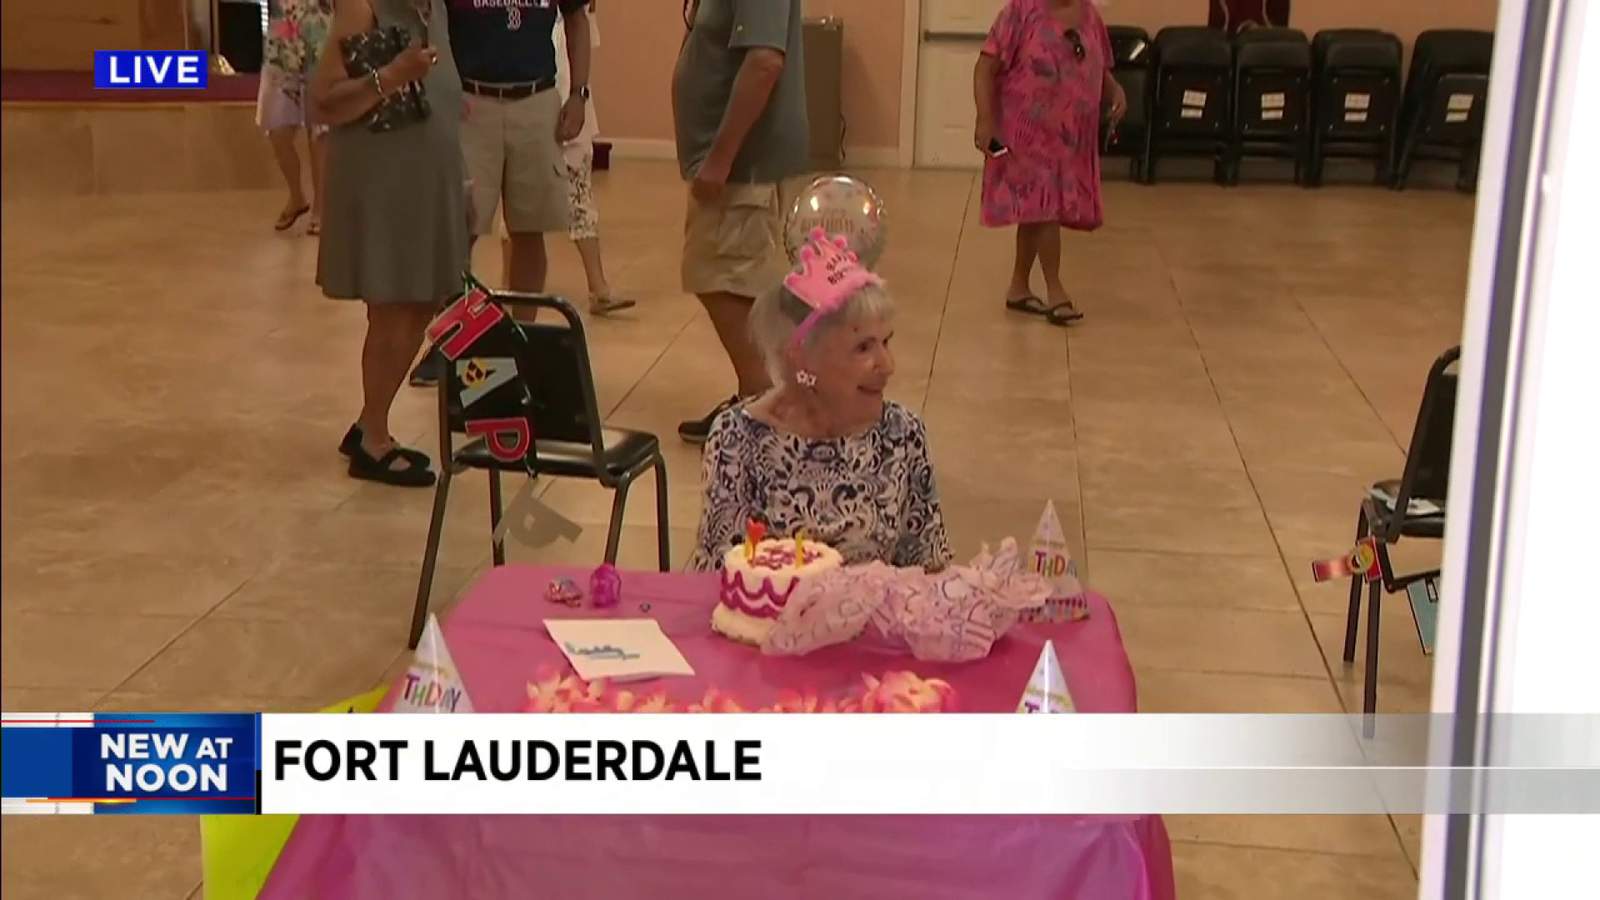 Lucy celebrates 107th birthday in Fort Lauderdale